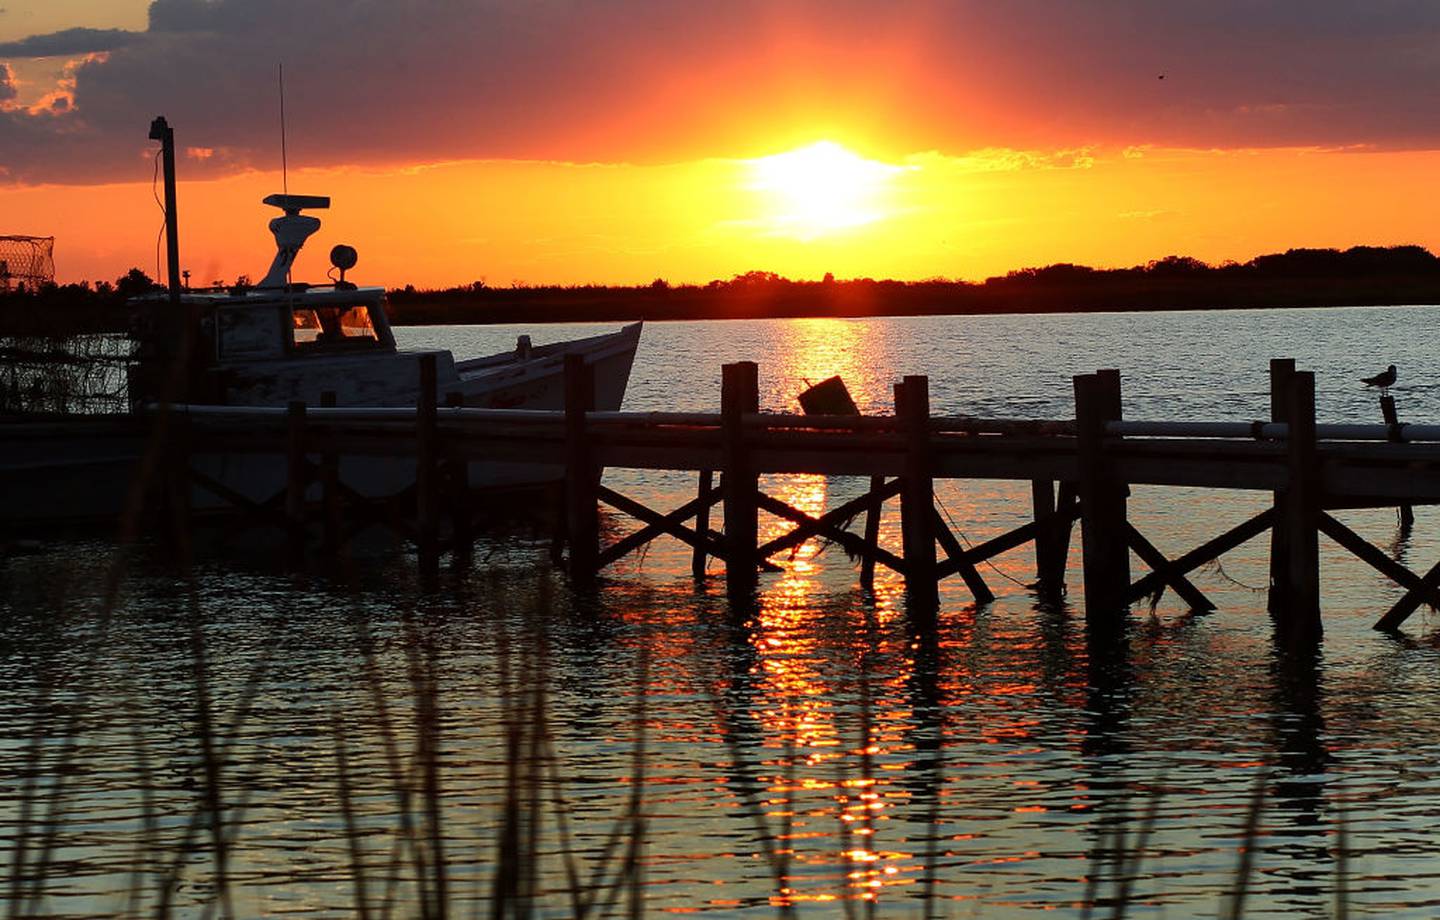 EWELL, MD - AUGUST 22:  The sun sets behind a fishing boat on August 22, 2011 in Ewell, Smith Island, Maryland.  on August 22, 2011 in Ewell, Smith Island, Maryland.